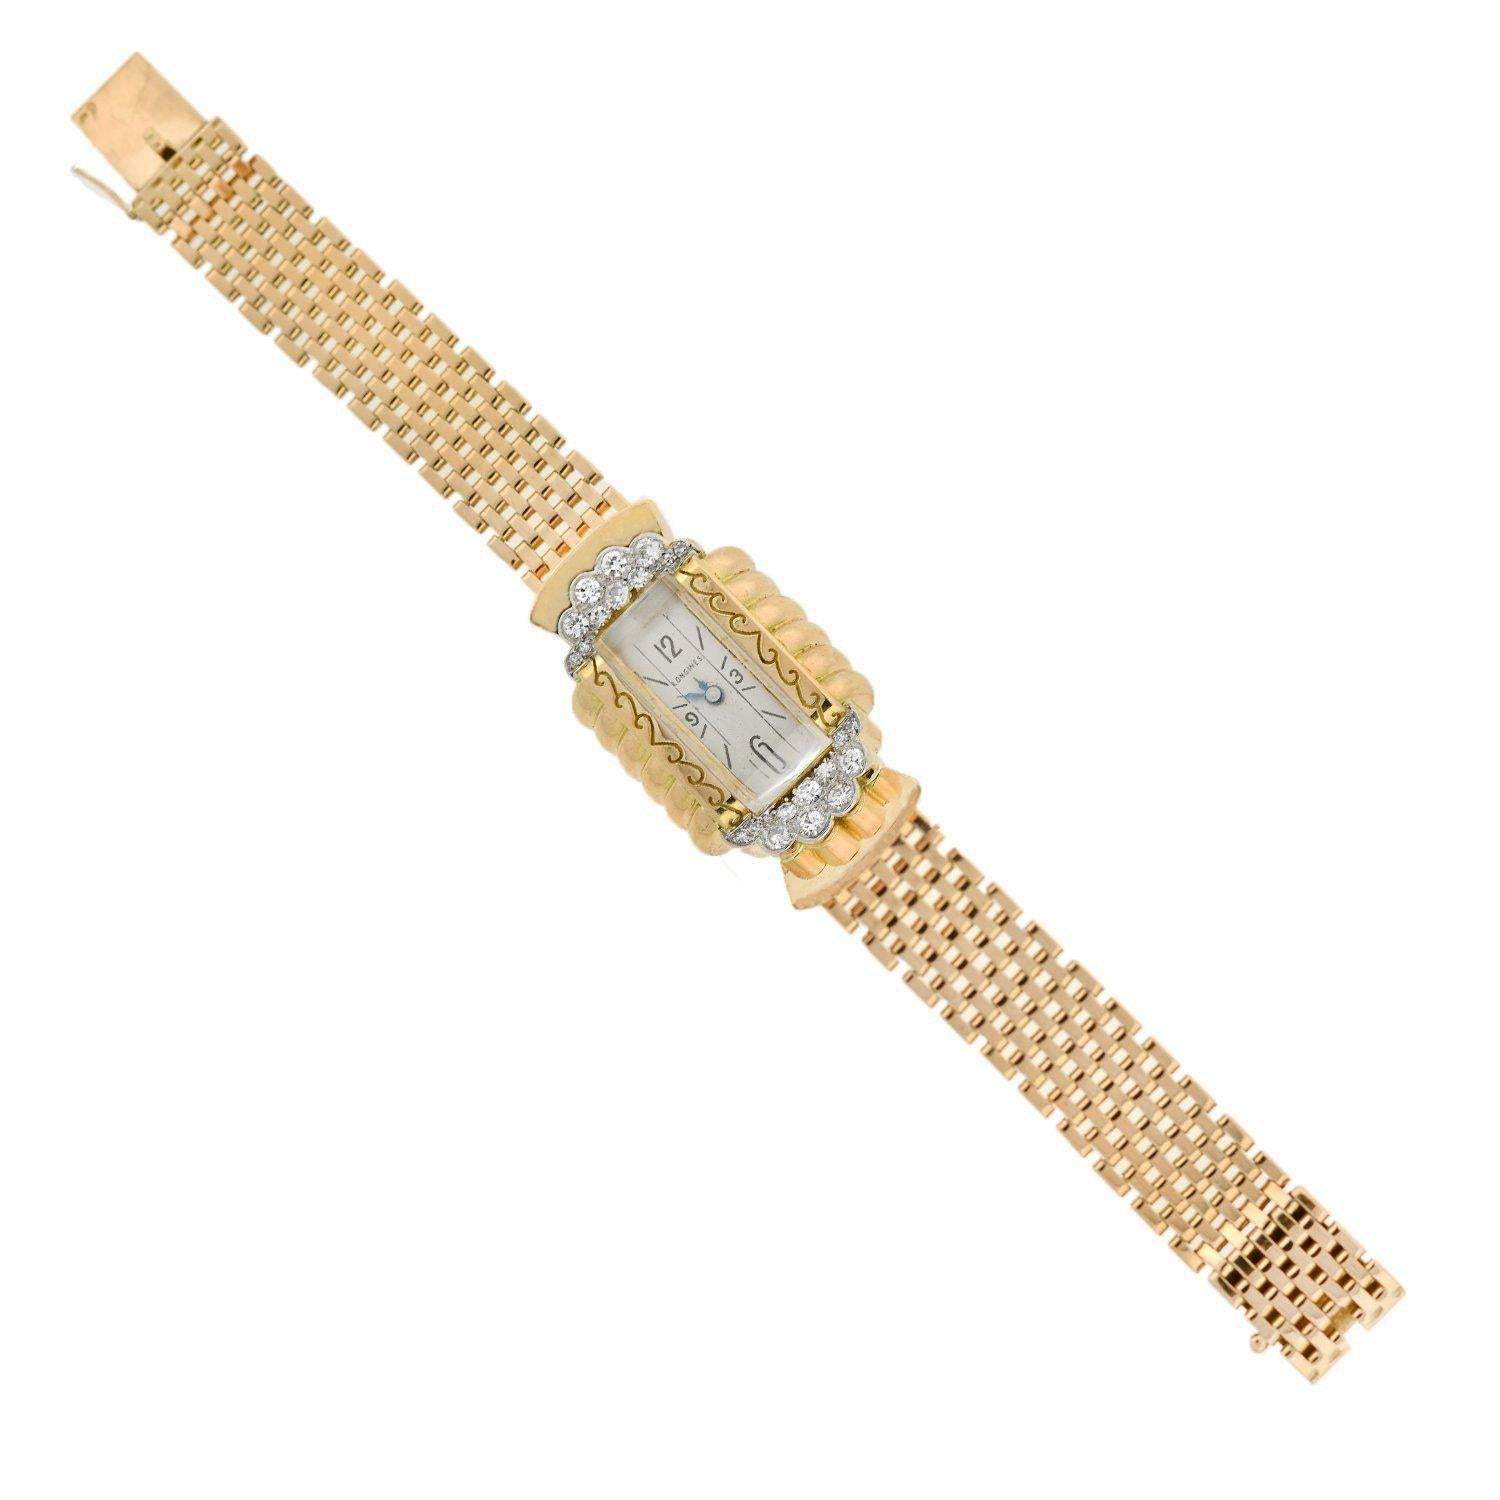 This stunning and unusual diamond watch from the late Art Deco (ca1930) era is an exceptional piece manufactured by the world renowned watch company, Longines! Crafted in vibrant 18kt yellow gold with platinum accents, this gorgeous ladies watch